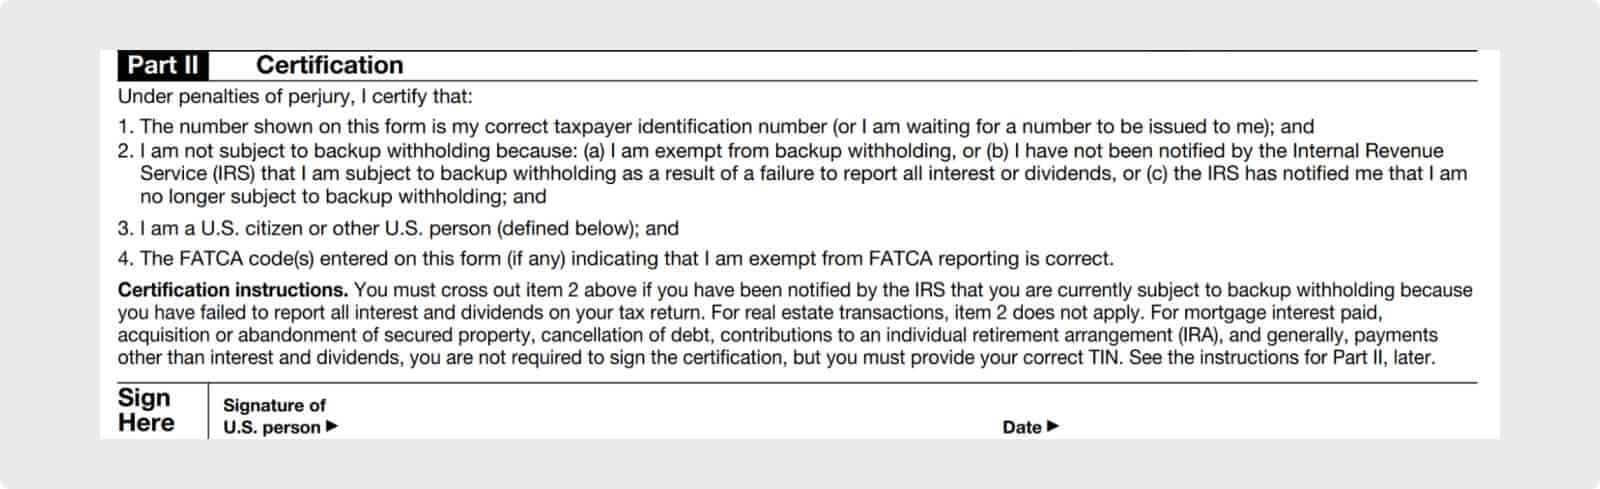 Once Form W-9 has been completed, you should send it to your client or payor and not to the IRS.